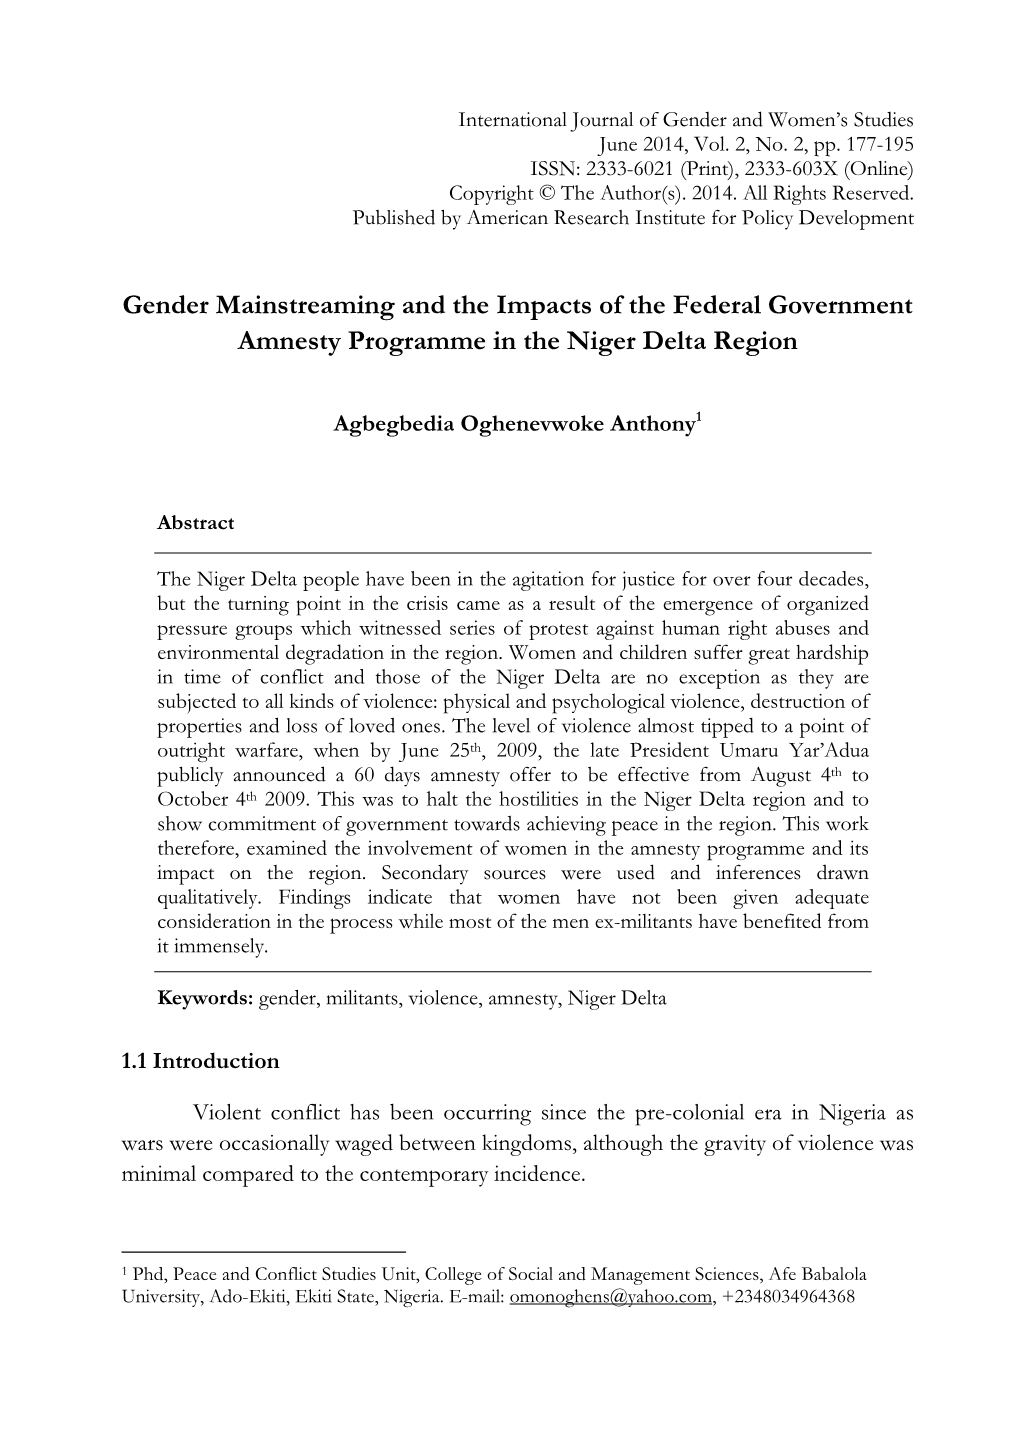 Gender Mainstreaming and the Impacts of the Federal Government Amnesty Programme in the Niger Delta Region